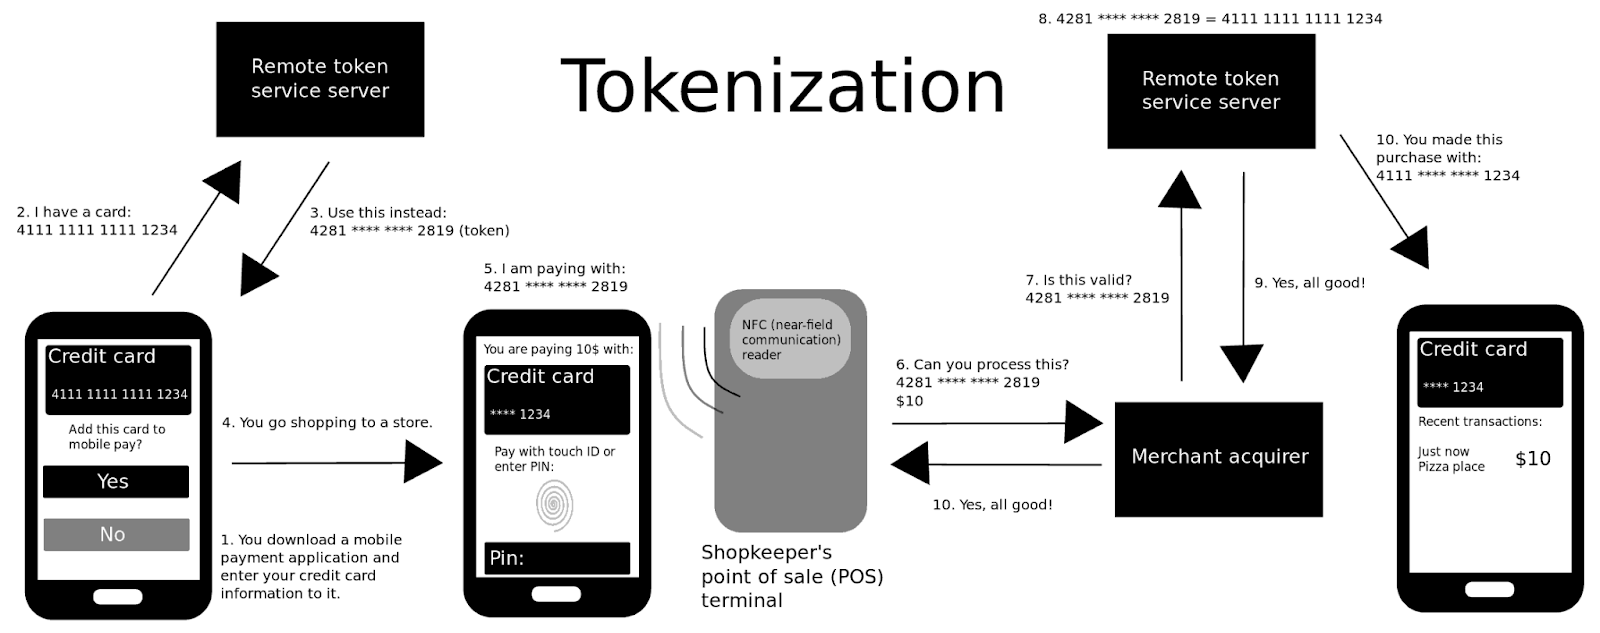 What Tokenization Means And The Tools To Do It